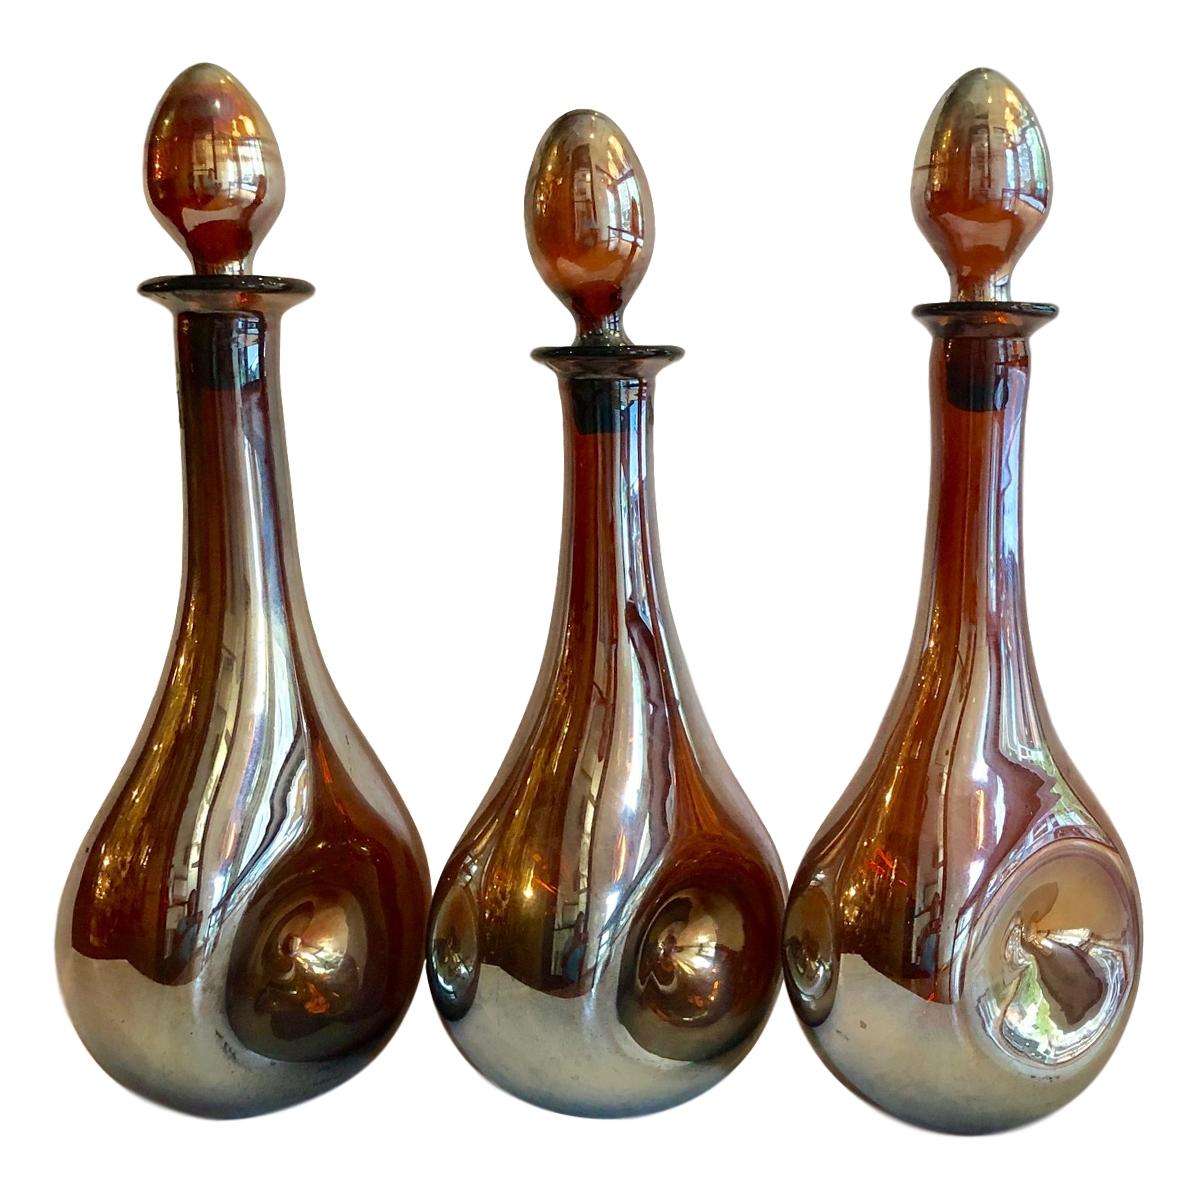 A set of three French circa 1940s iridescent glass decanters with stoppers. Sold individually.

Measurements:
Height 17